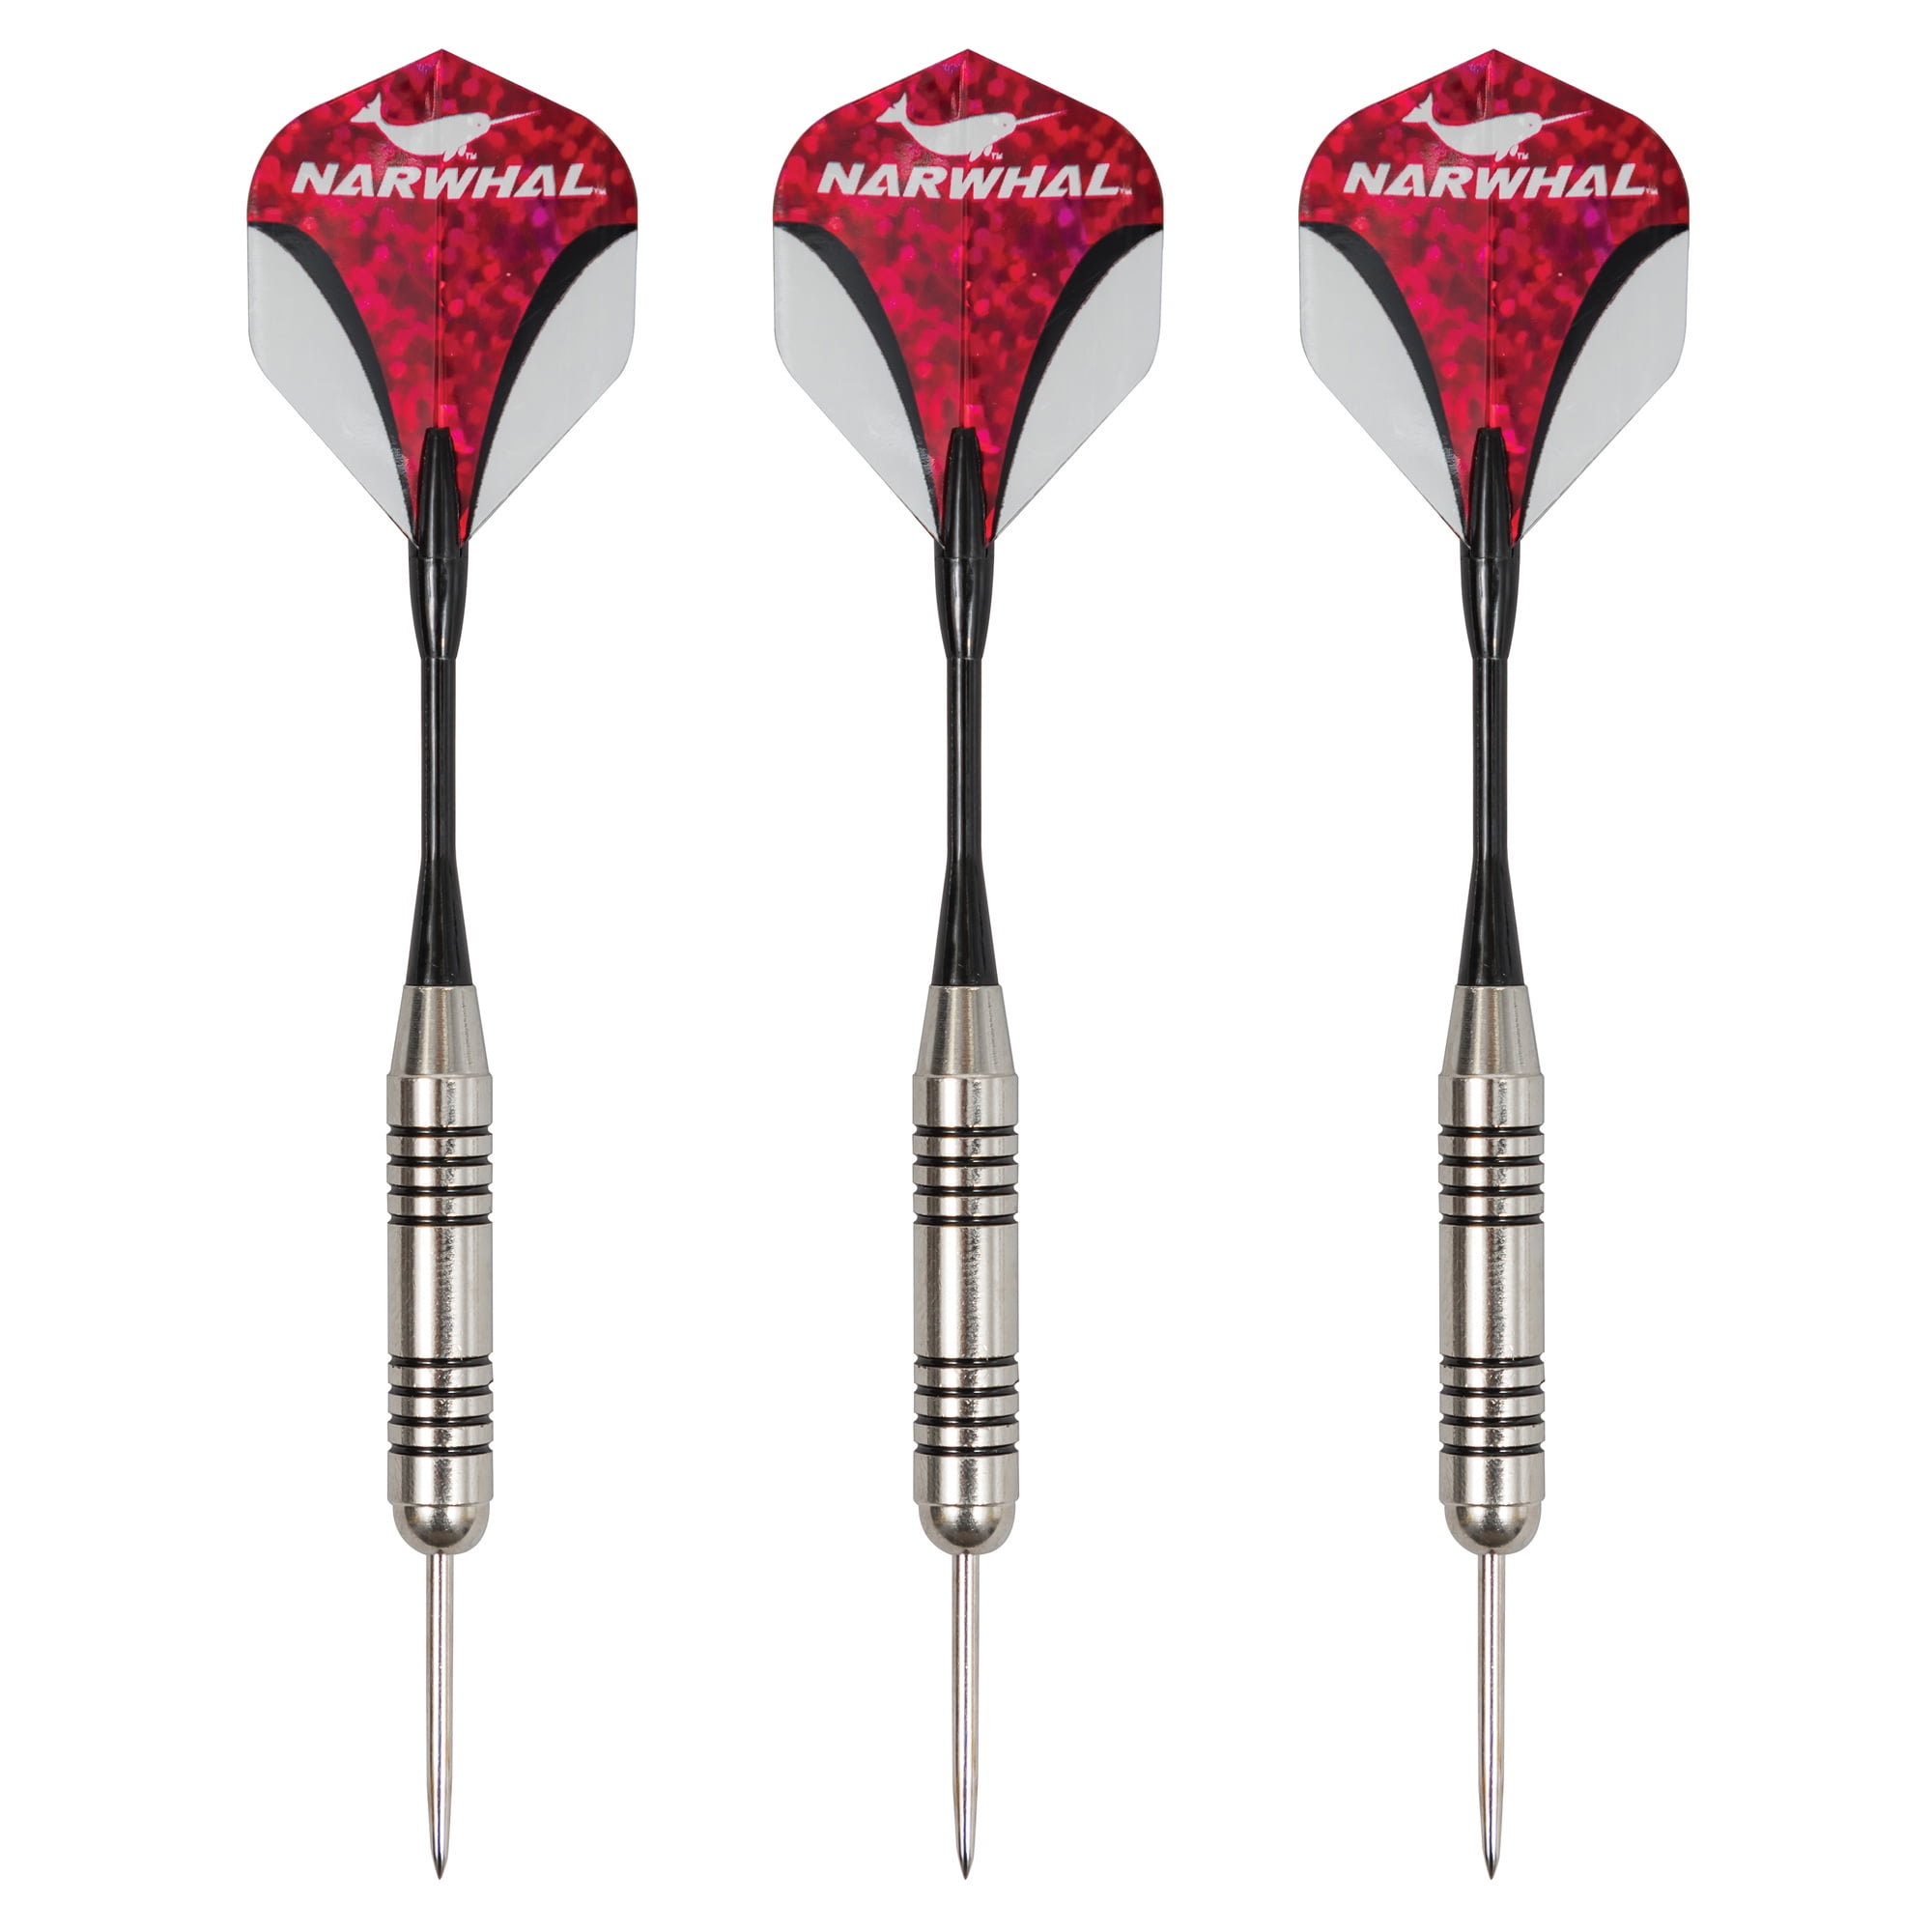 Narwhal Tournament 22g Steel Tip Darts - 3 Pack 5.5 in. Darts with Metal Tip and Storage Case